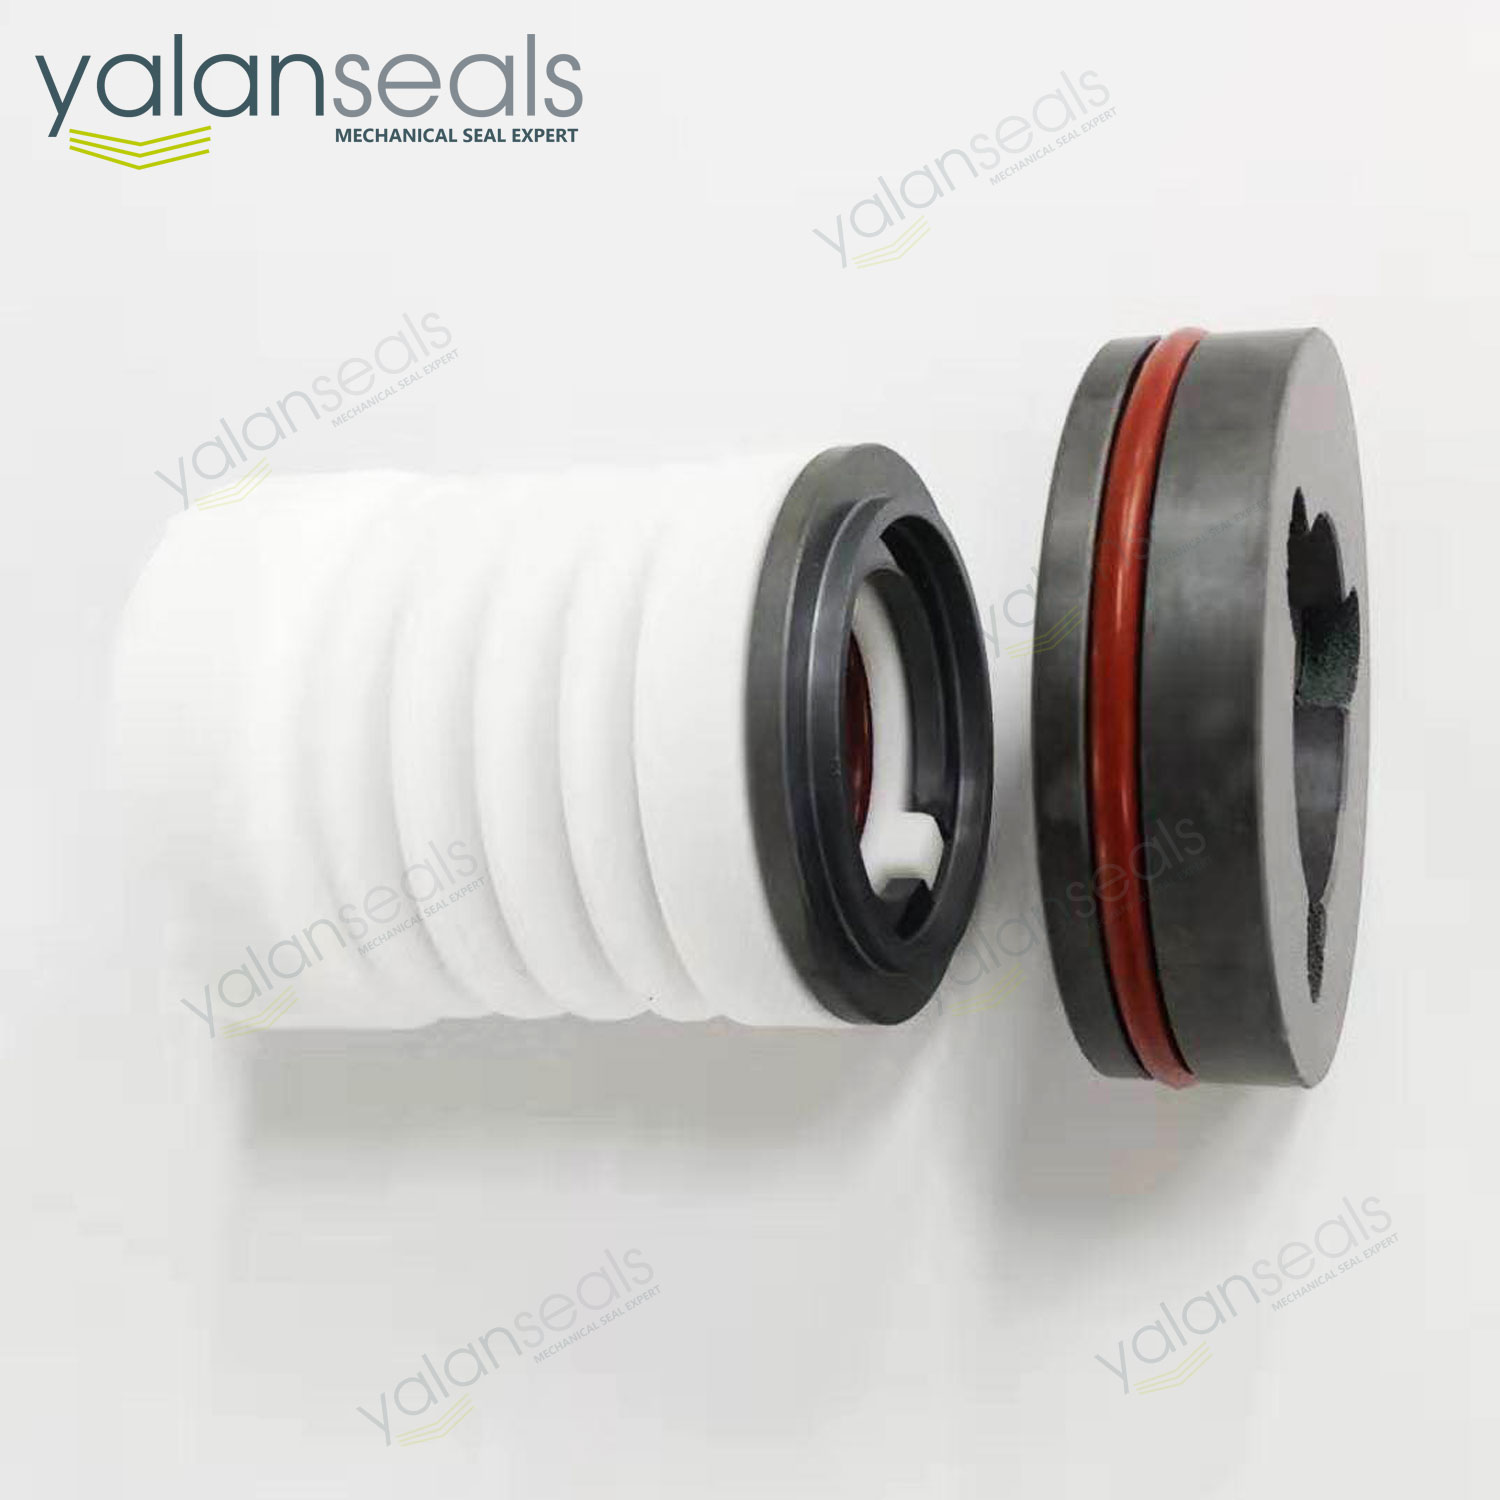 SD-25 Single Spring PTFE Bellow Mechanical Seal for Acid Pumps